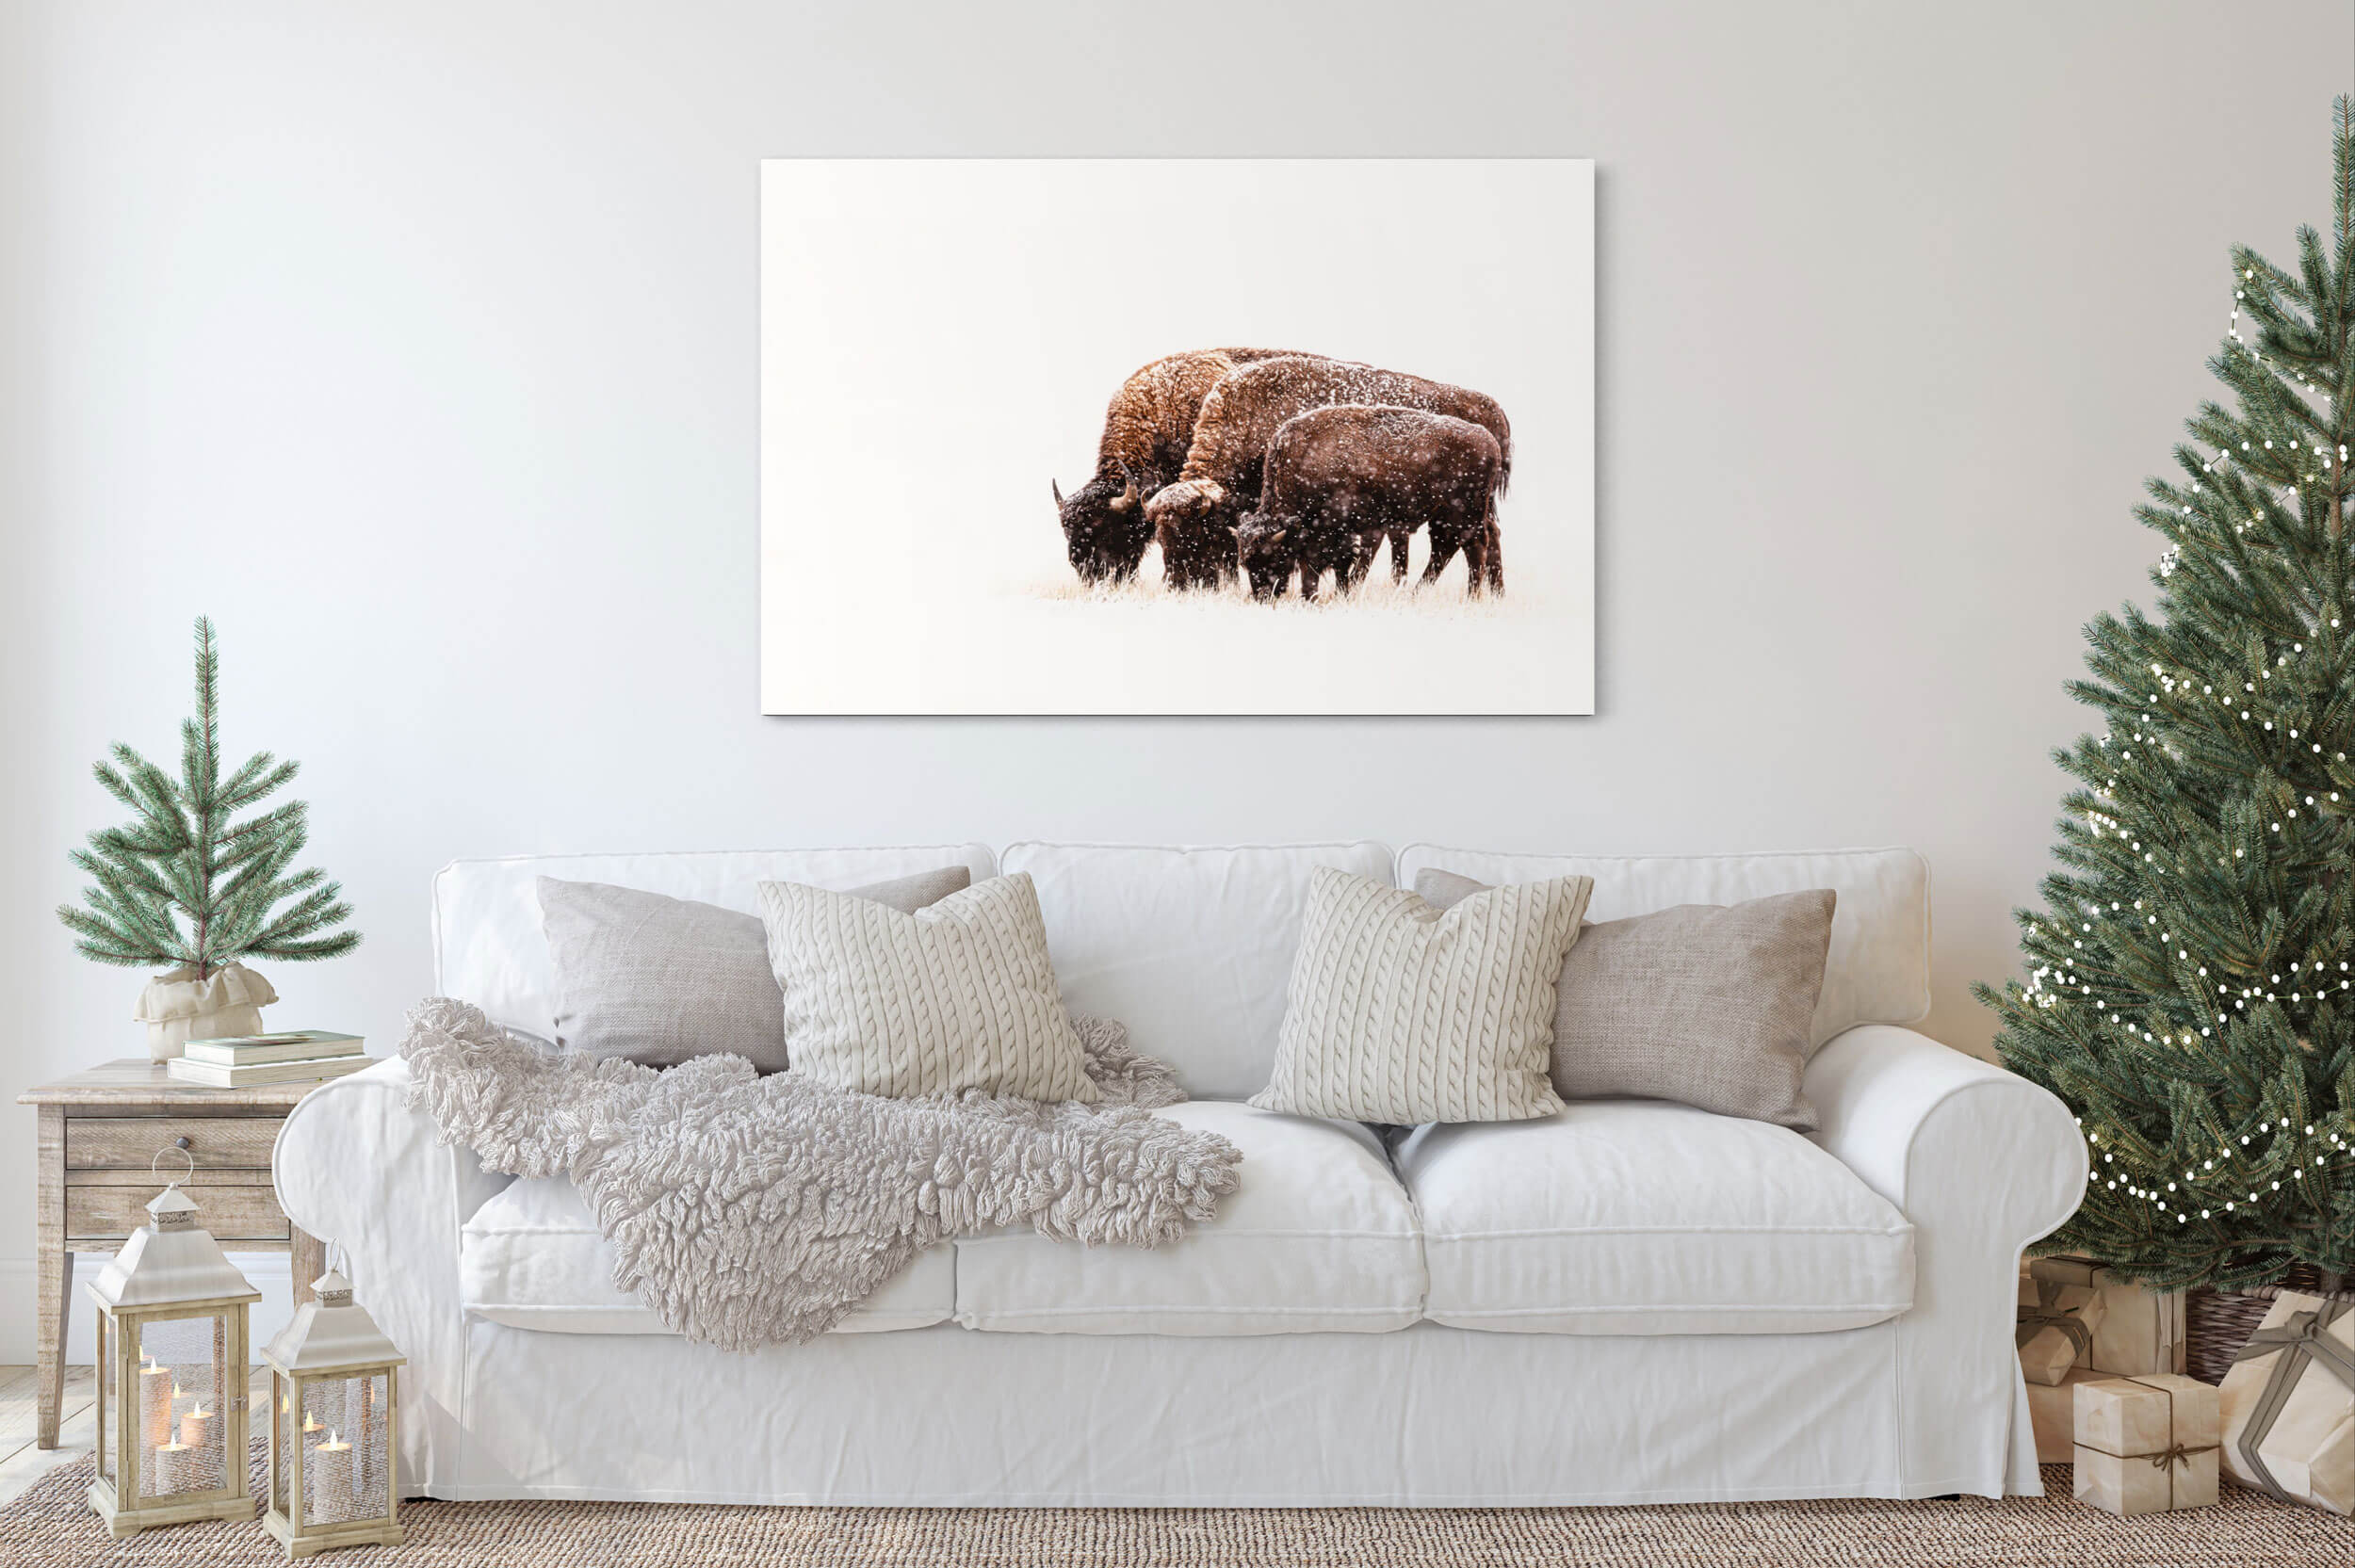 A bison picture hangs in a living room.